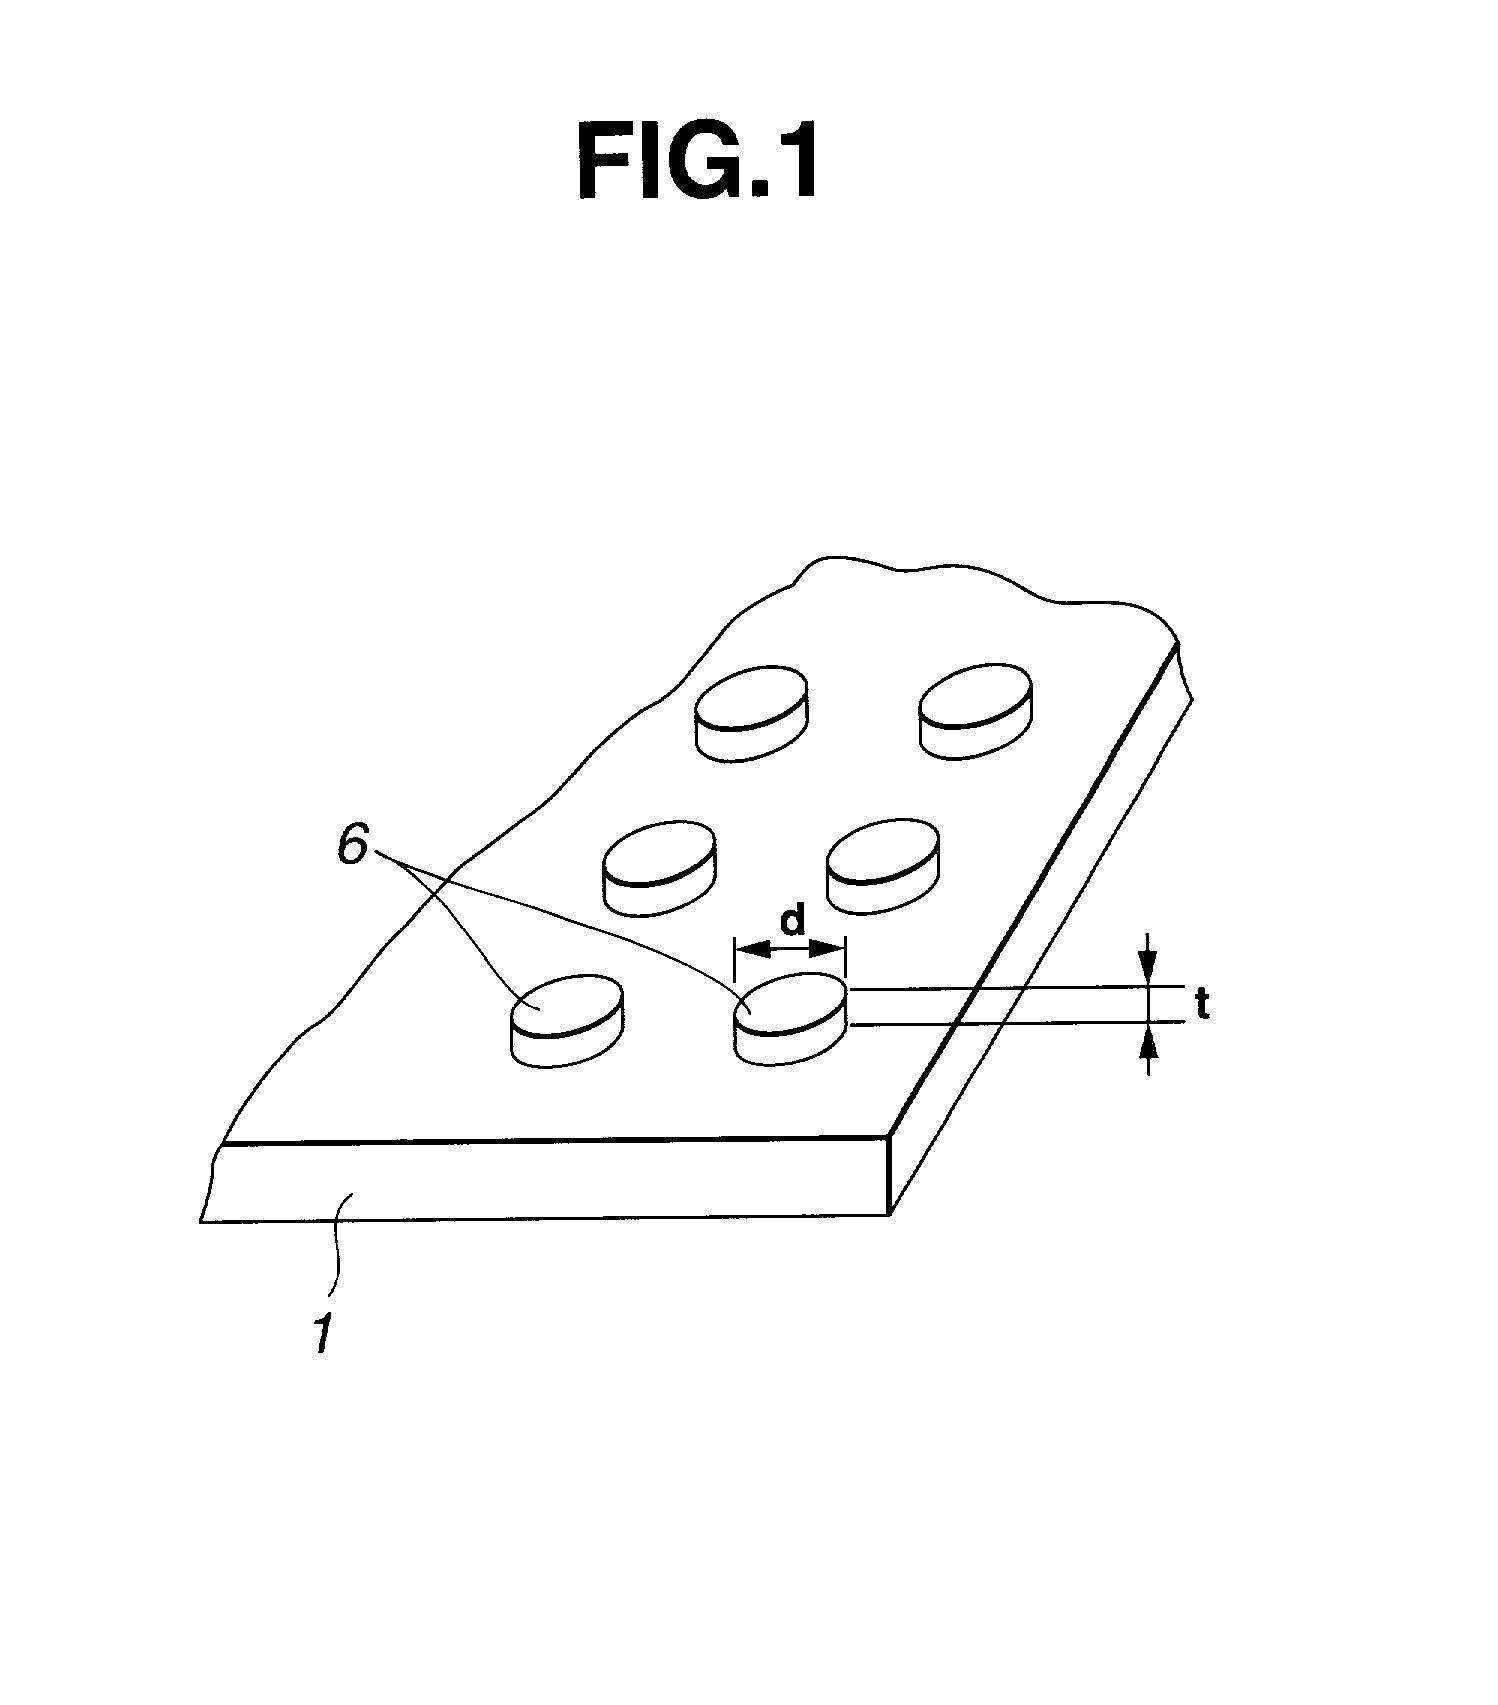 Magnetic thin film and process for producing the same